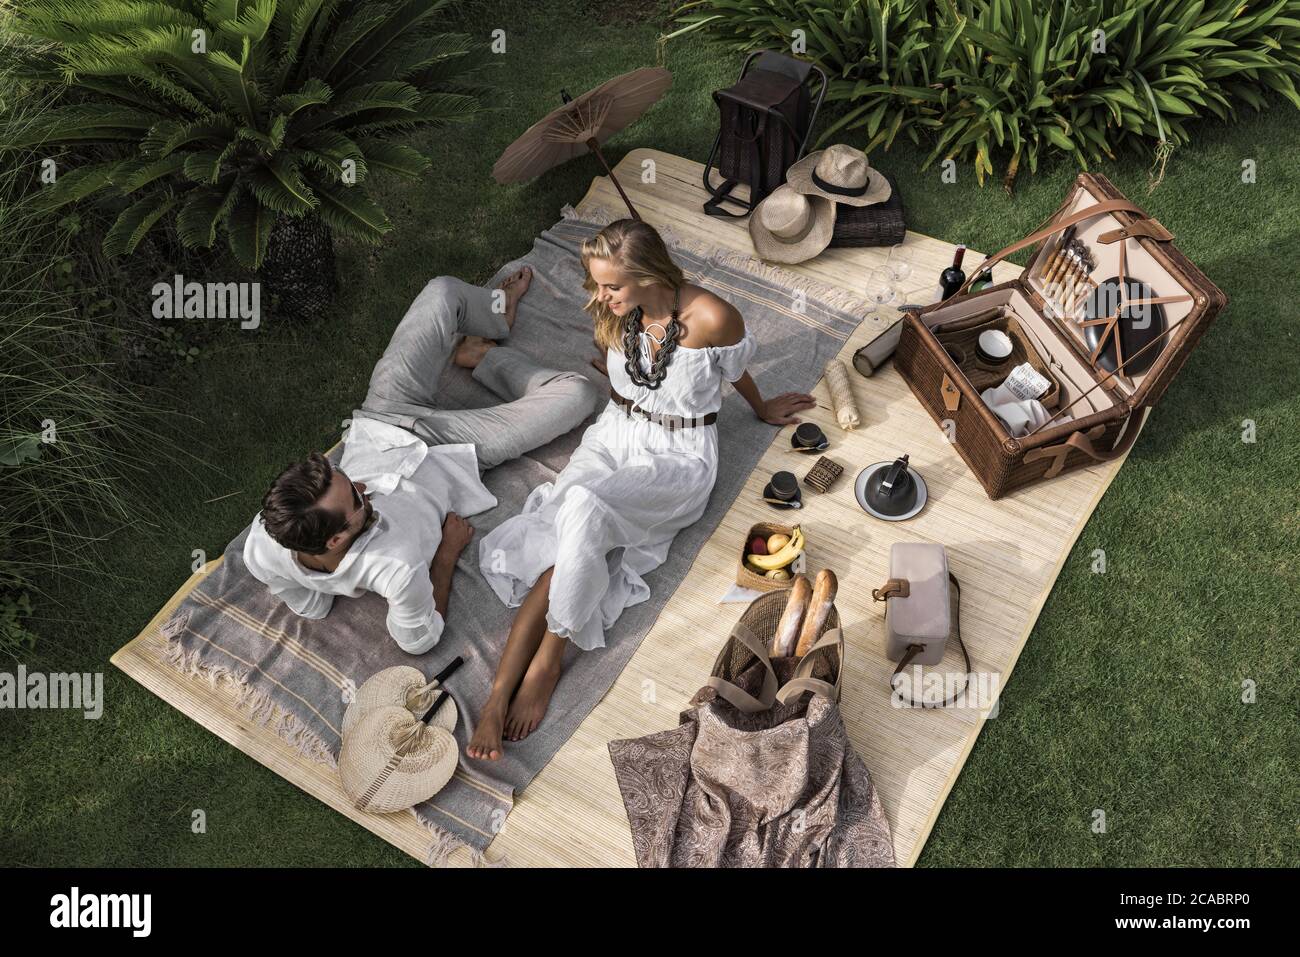 Asia, Indonesia, Bali, young Caucasian couple enjoying a luxury, authentic picnic, set in a tropical garden, , wearing smart casual clothing, while on Stock Photo